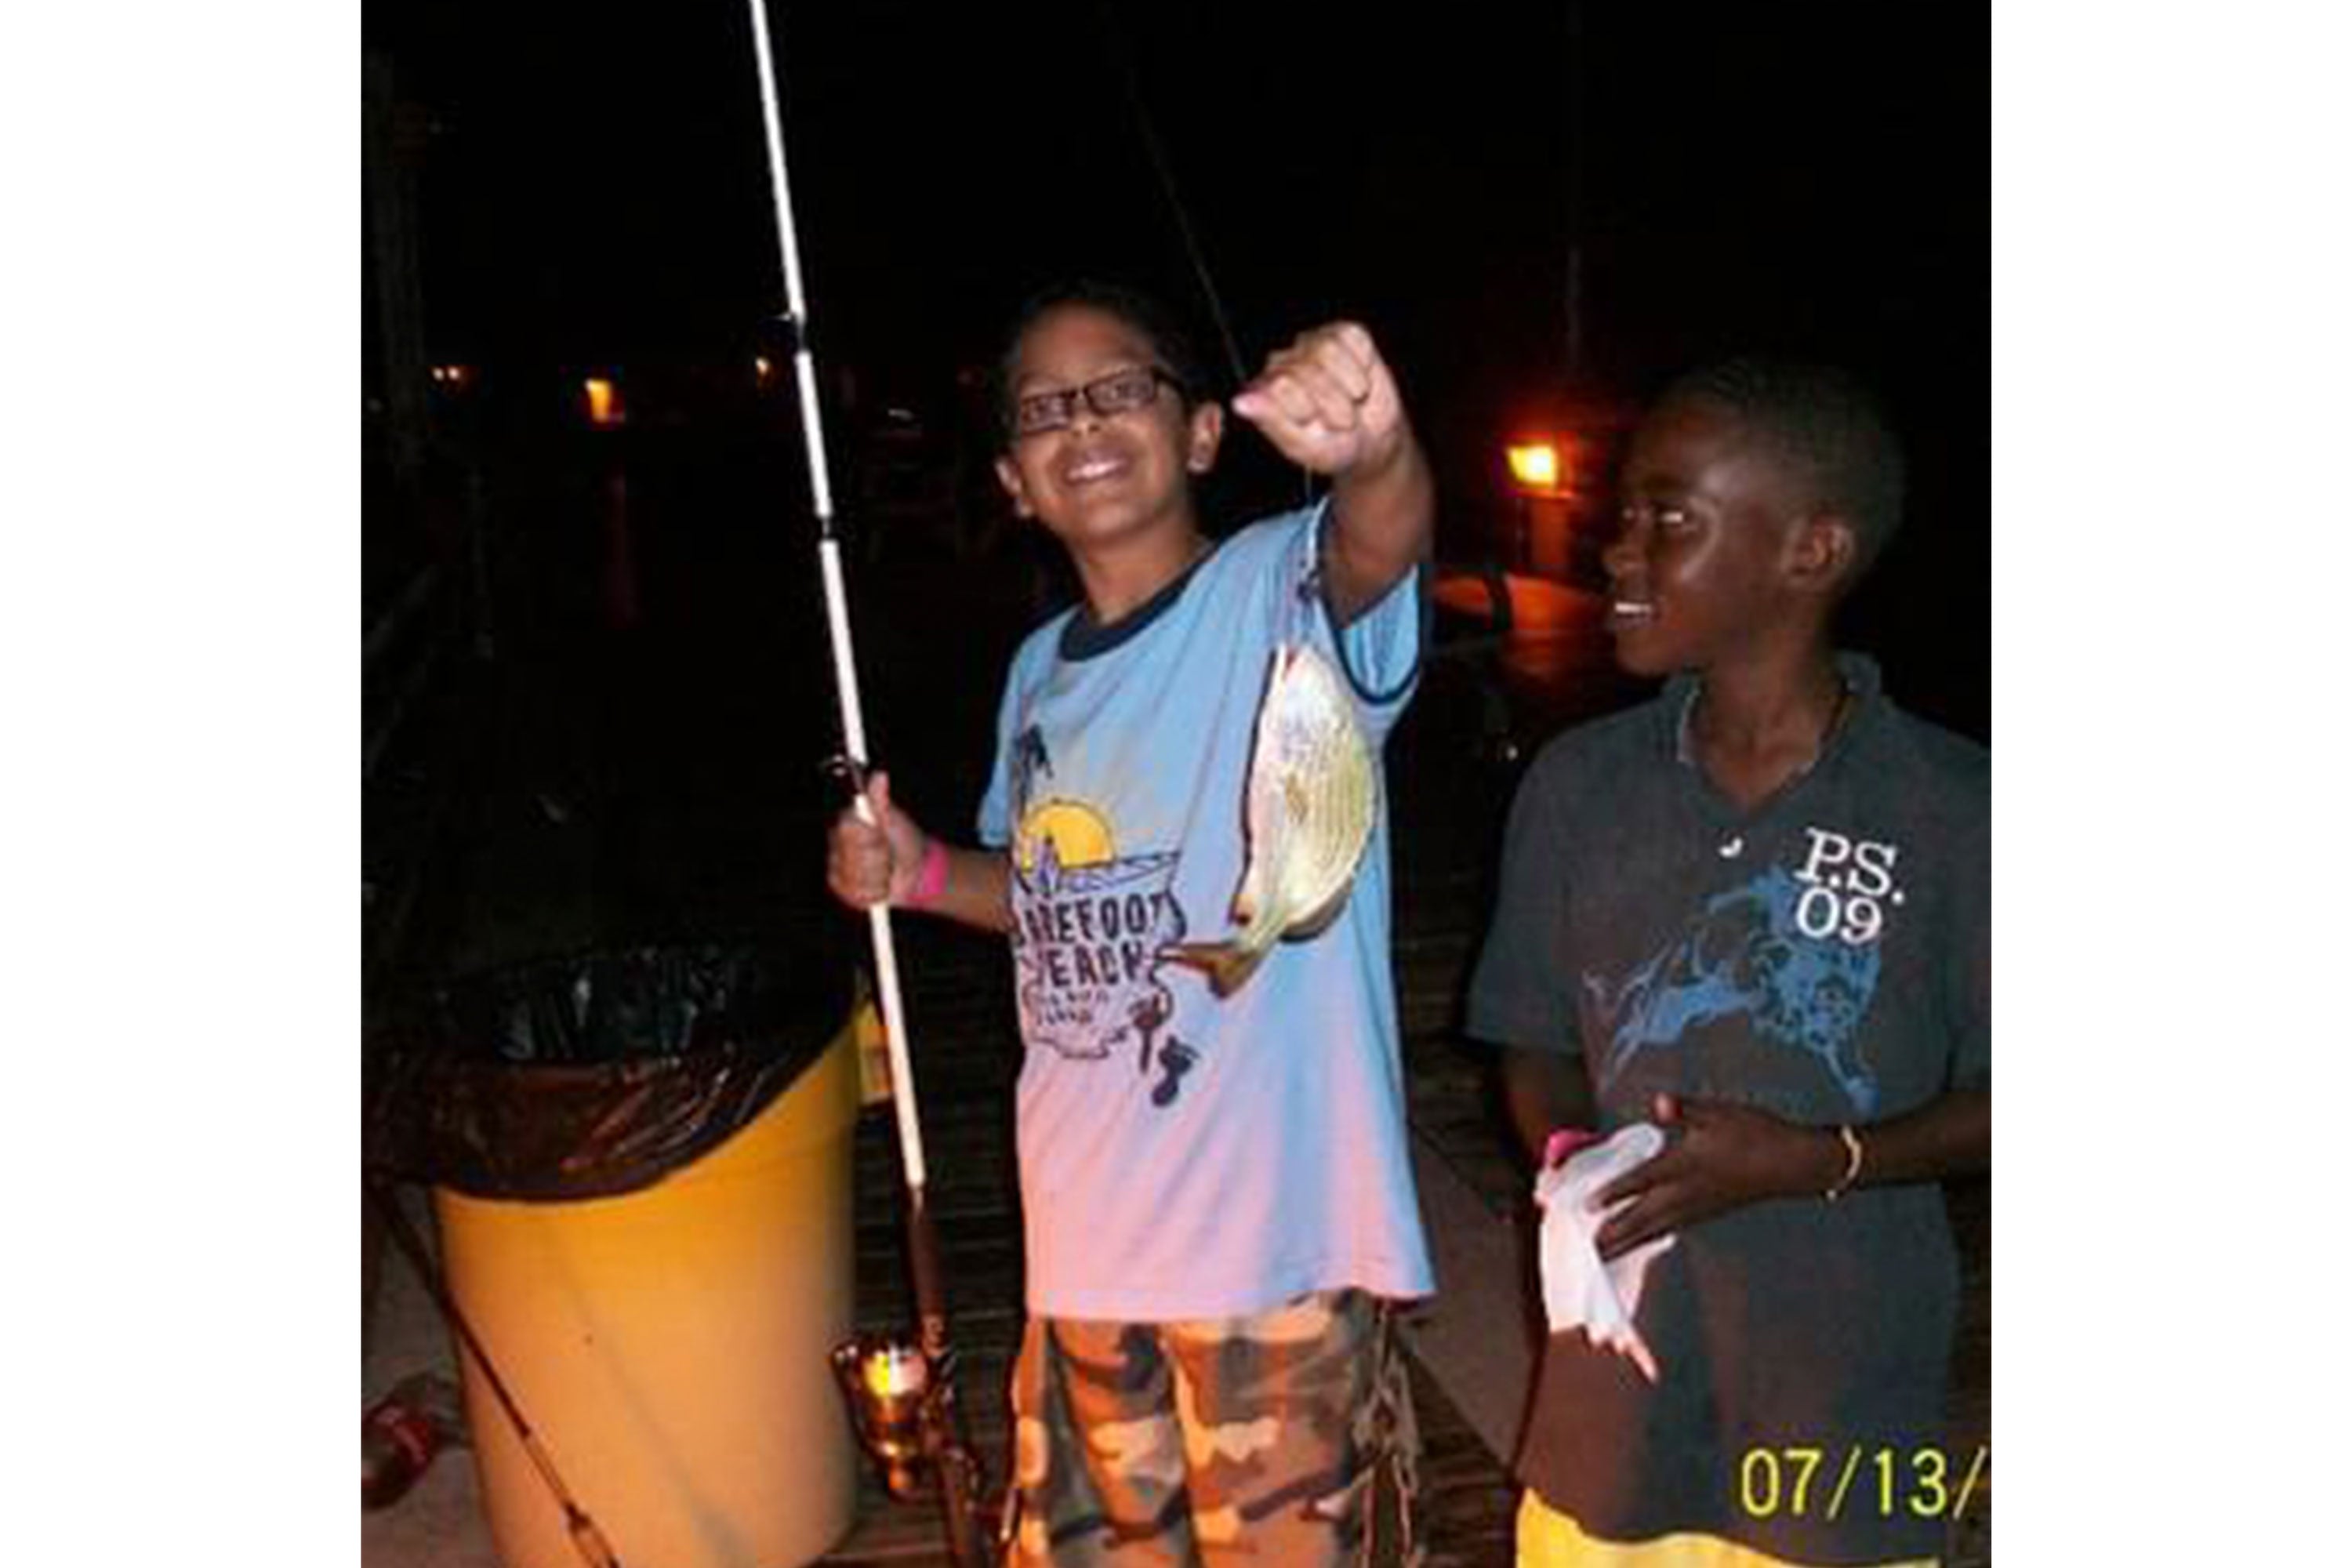 Emmanuel and a friend fishing at night with friend showing a fish caught on his line